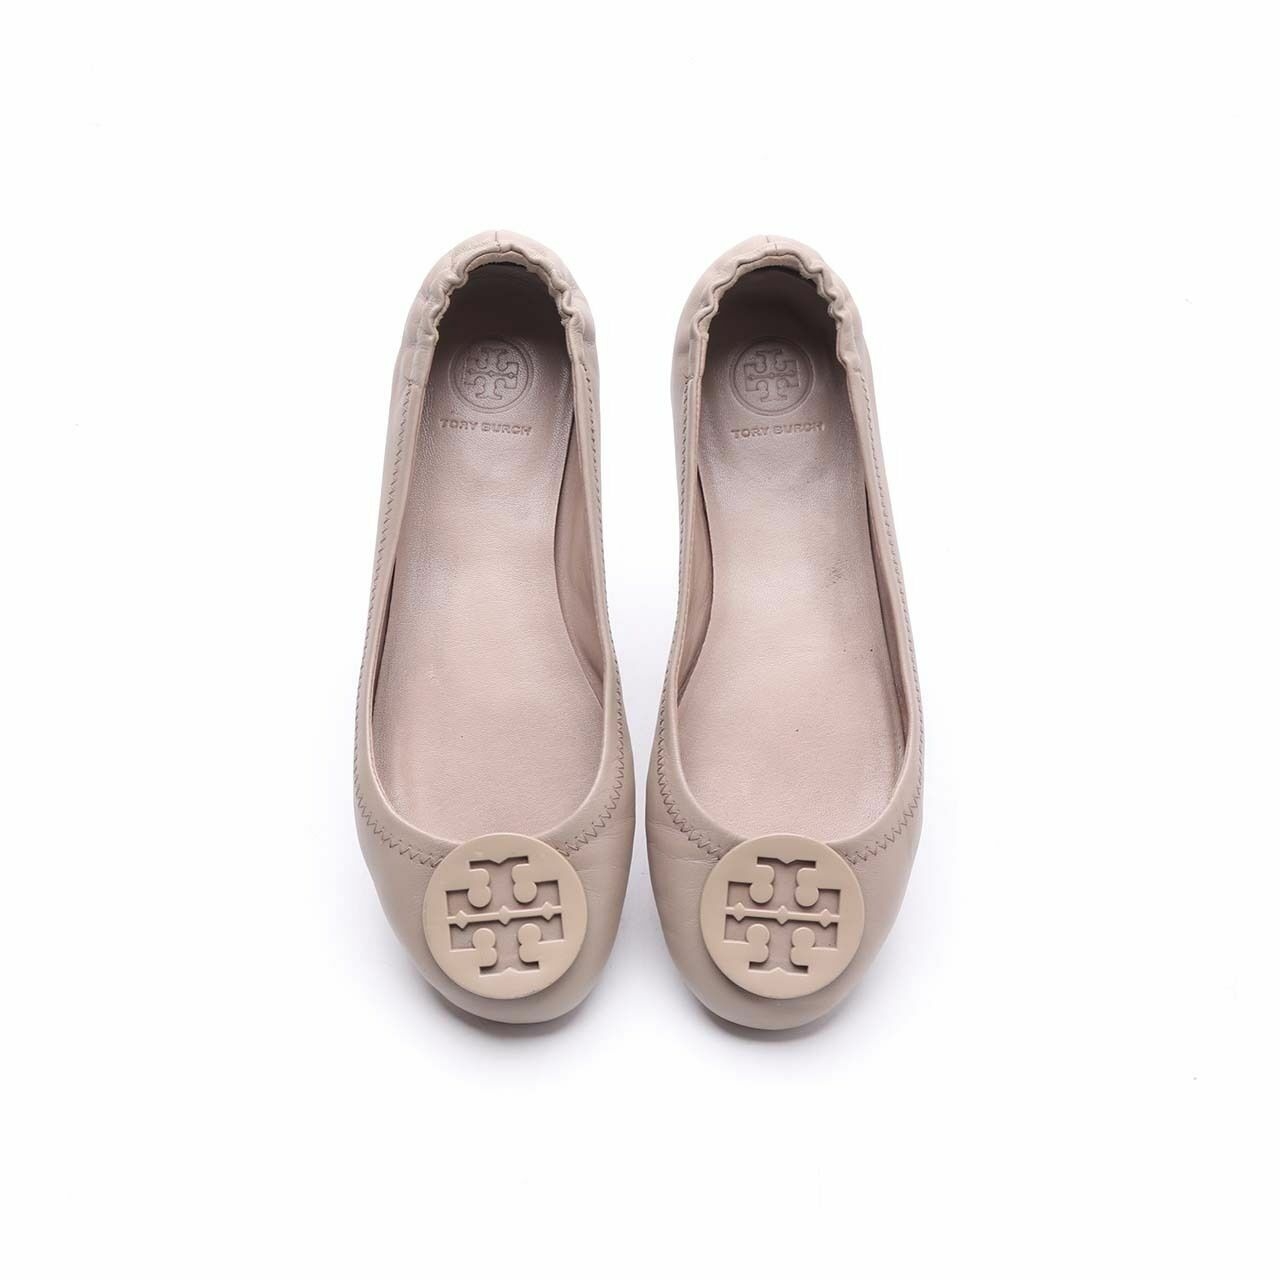 Tory Burch Minnie Travel Ballet With Logo Nappa Leather Flats